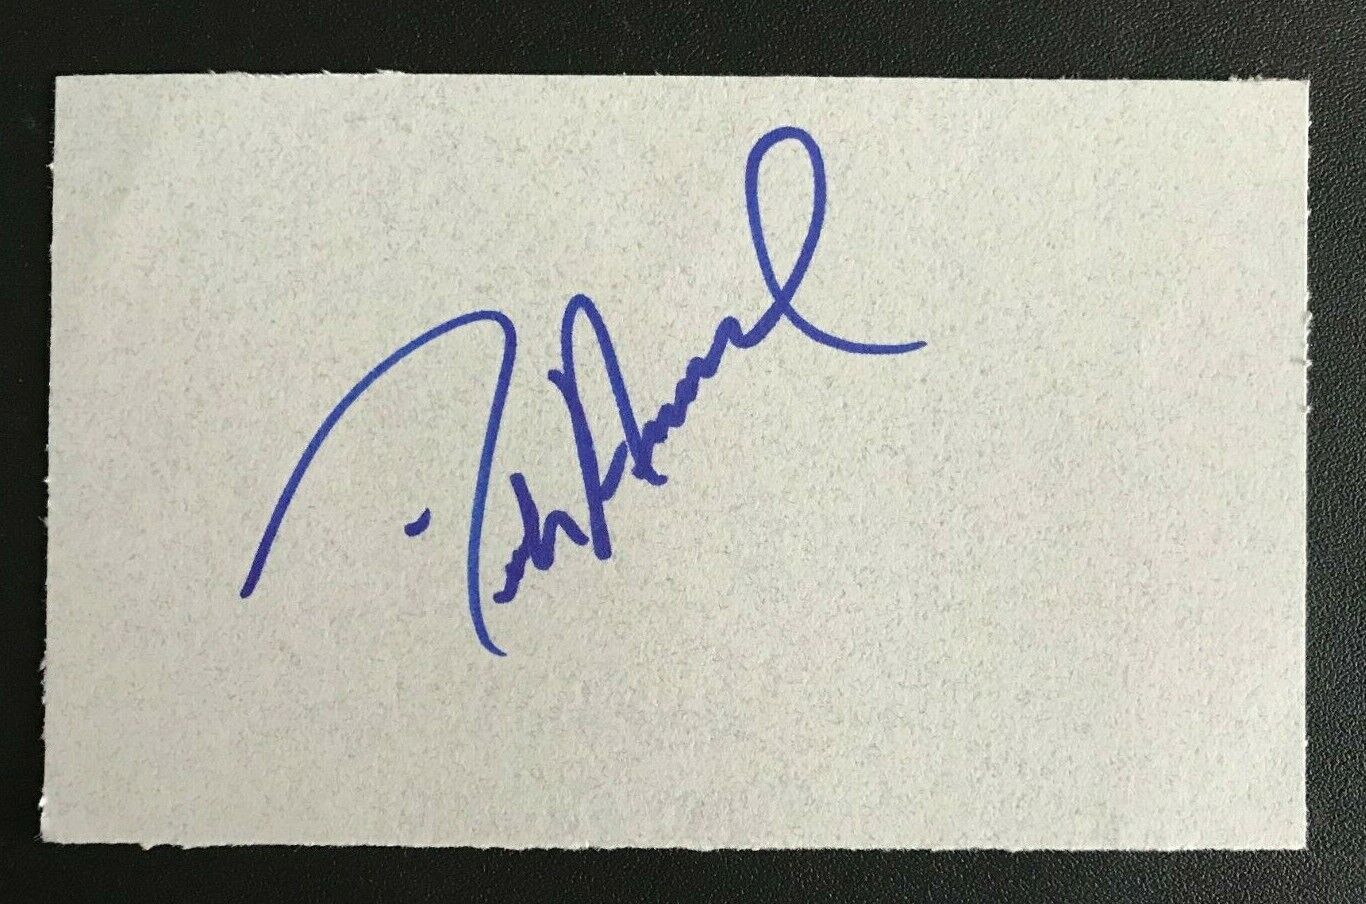 Rich Amaral Mlb Mariners Baseball Auto Autographed Signed 3x5 Index Card Cut